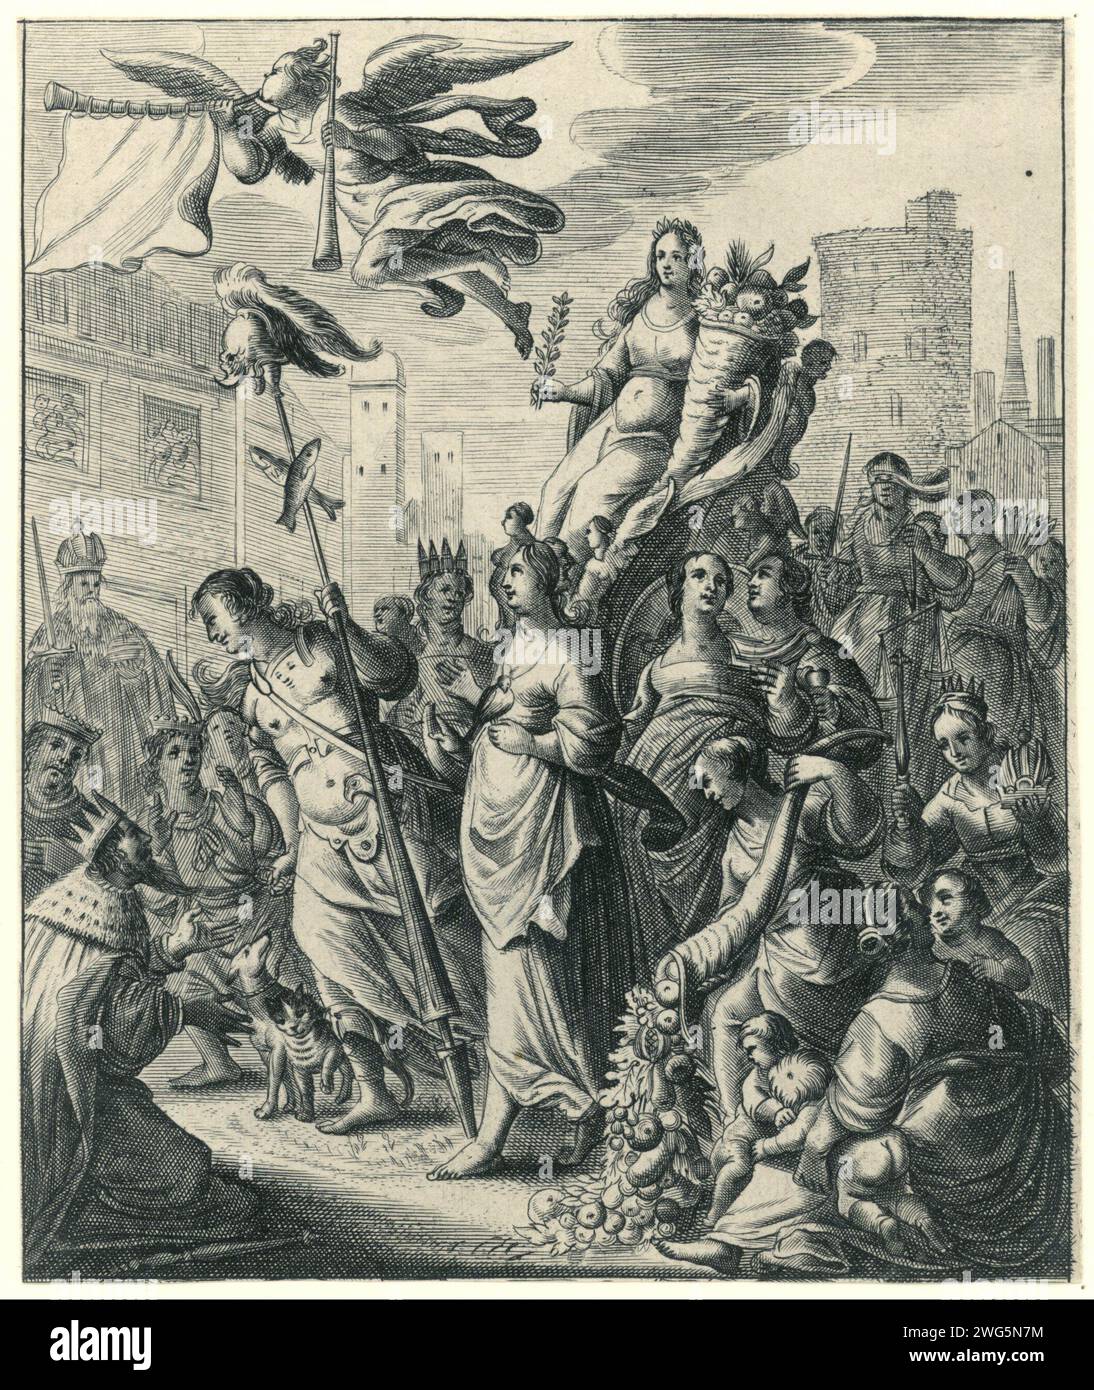 System on the Peace of Munster, 1648, Salomon Savery (Possible), 1648 print Symbol on the peace of Munster, 1648. Triumphal parade of peace with a horn of abundance in the arms, surrounded by various allegorical characters. Above the procession, the fame proclaims the news of the peace. Northern Netherlands paper engraving ame; 'Truss', 'Buona', 'Chiara' (RIPA). PEACE AND PROSPERITY, 'PAX ET ABUNDANTIA' Symbols, allegories of peace, 'pax'; 'Pace' (RIPA) Stock Photo